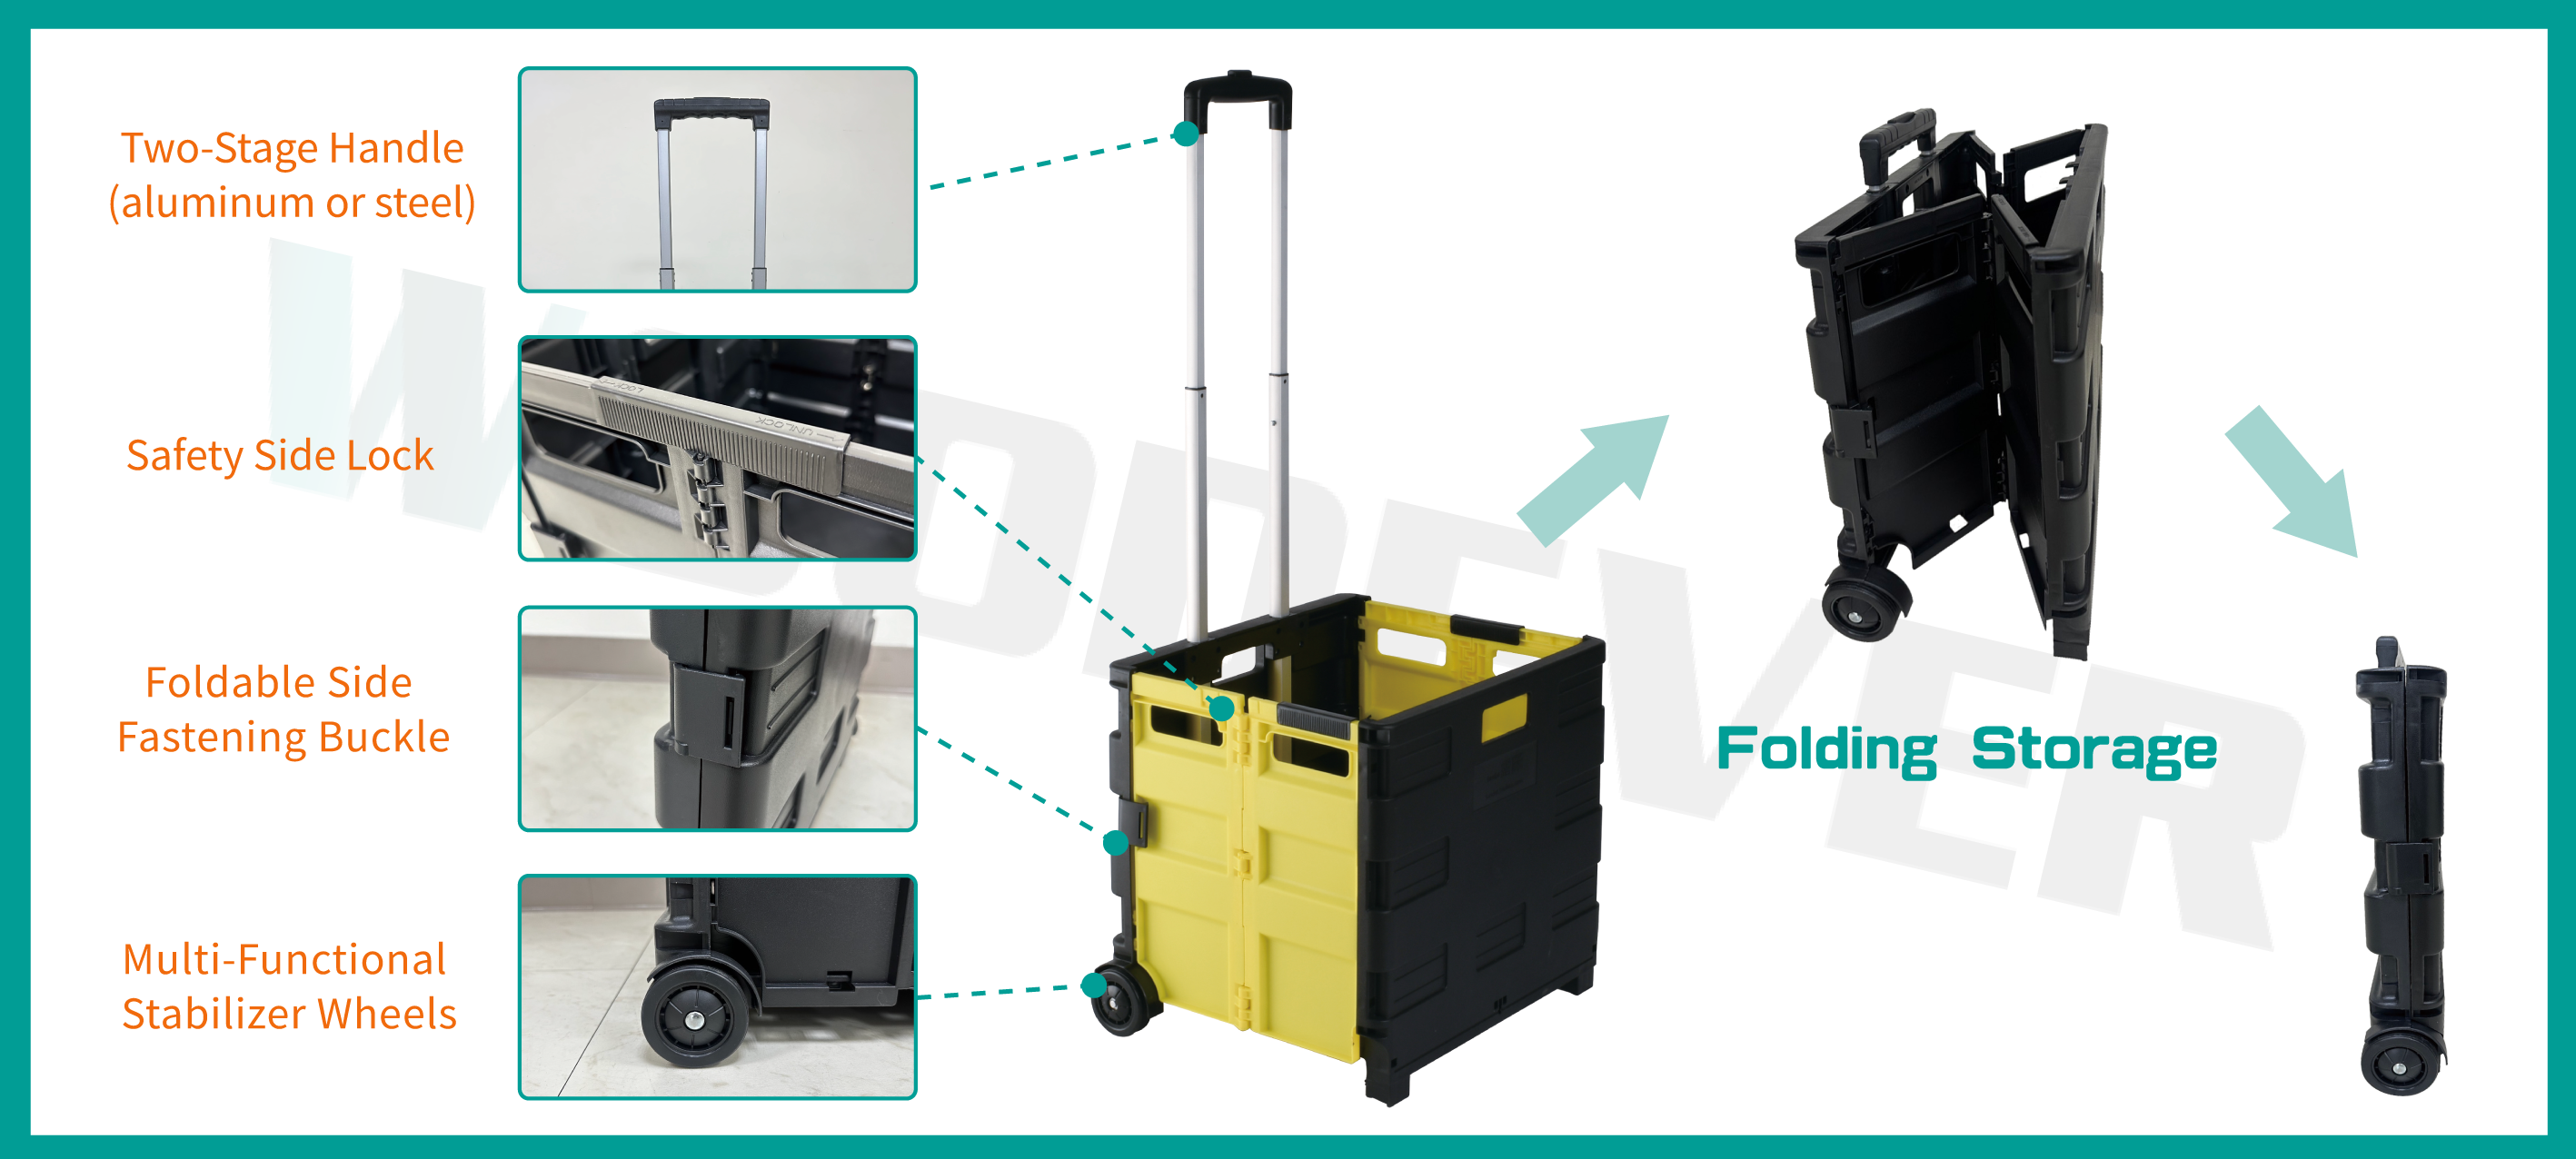 The WOODEVER Folding Storage Shopping Cart, made from high-quality PP, boasts waterproof and impact-resistant properties that extend the cart's lifespan, making it highly suitable for businesses to give as gifts to their clients.